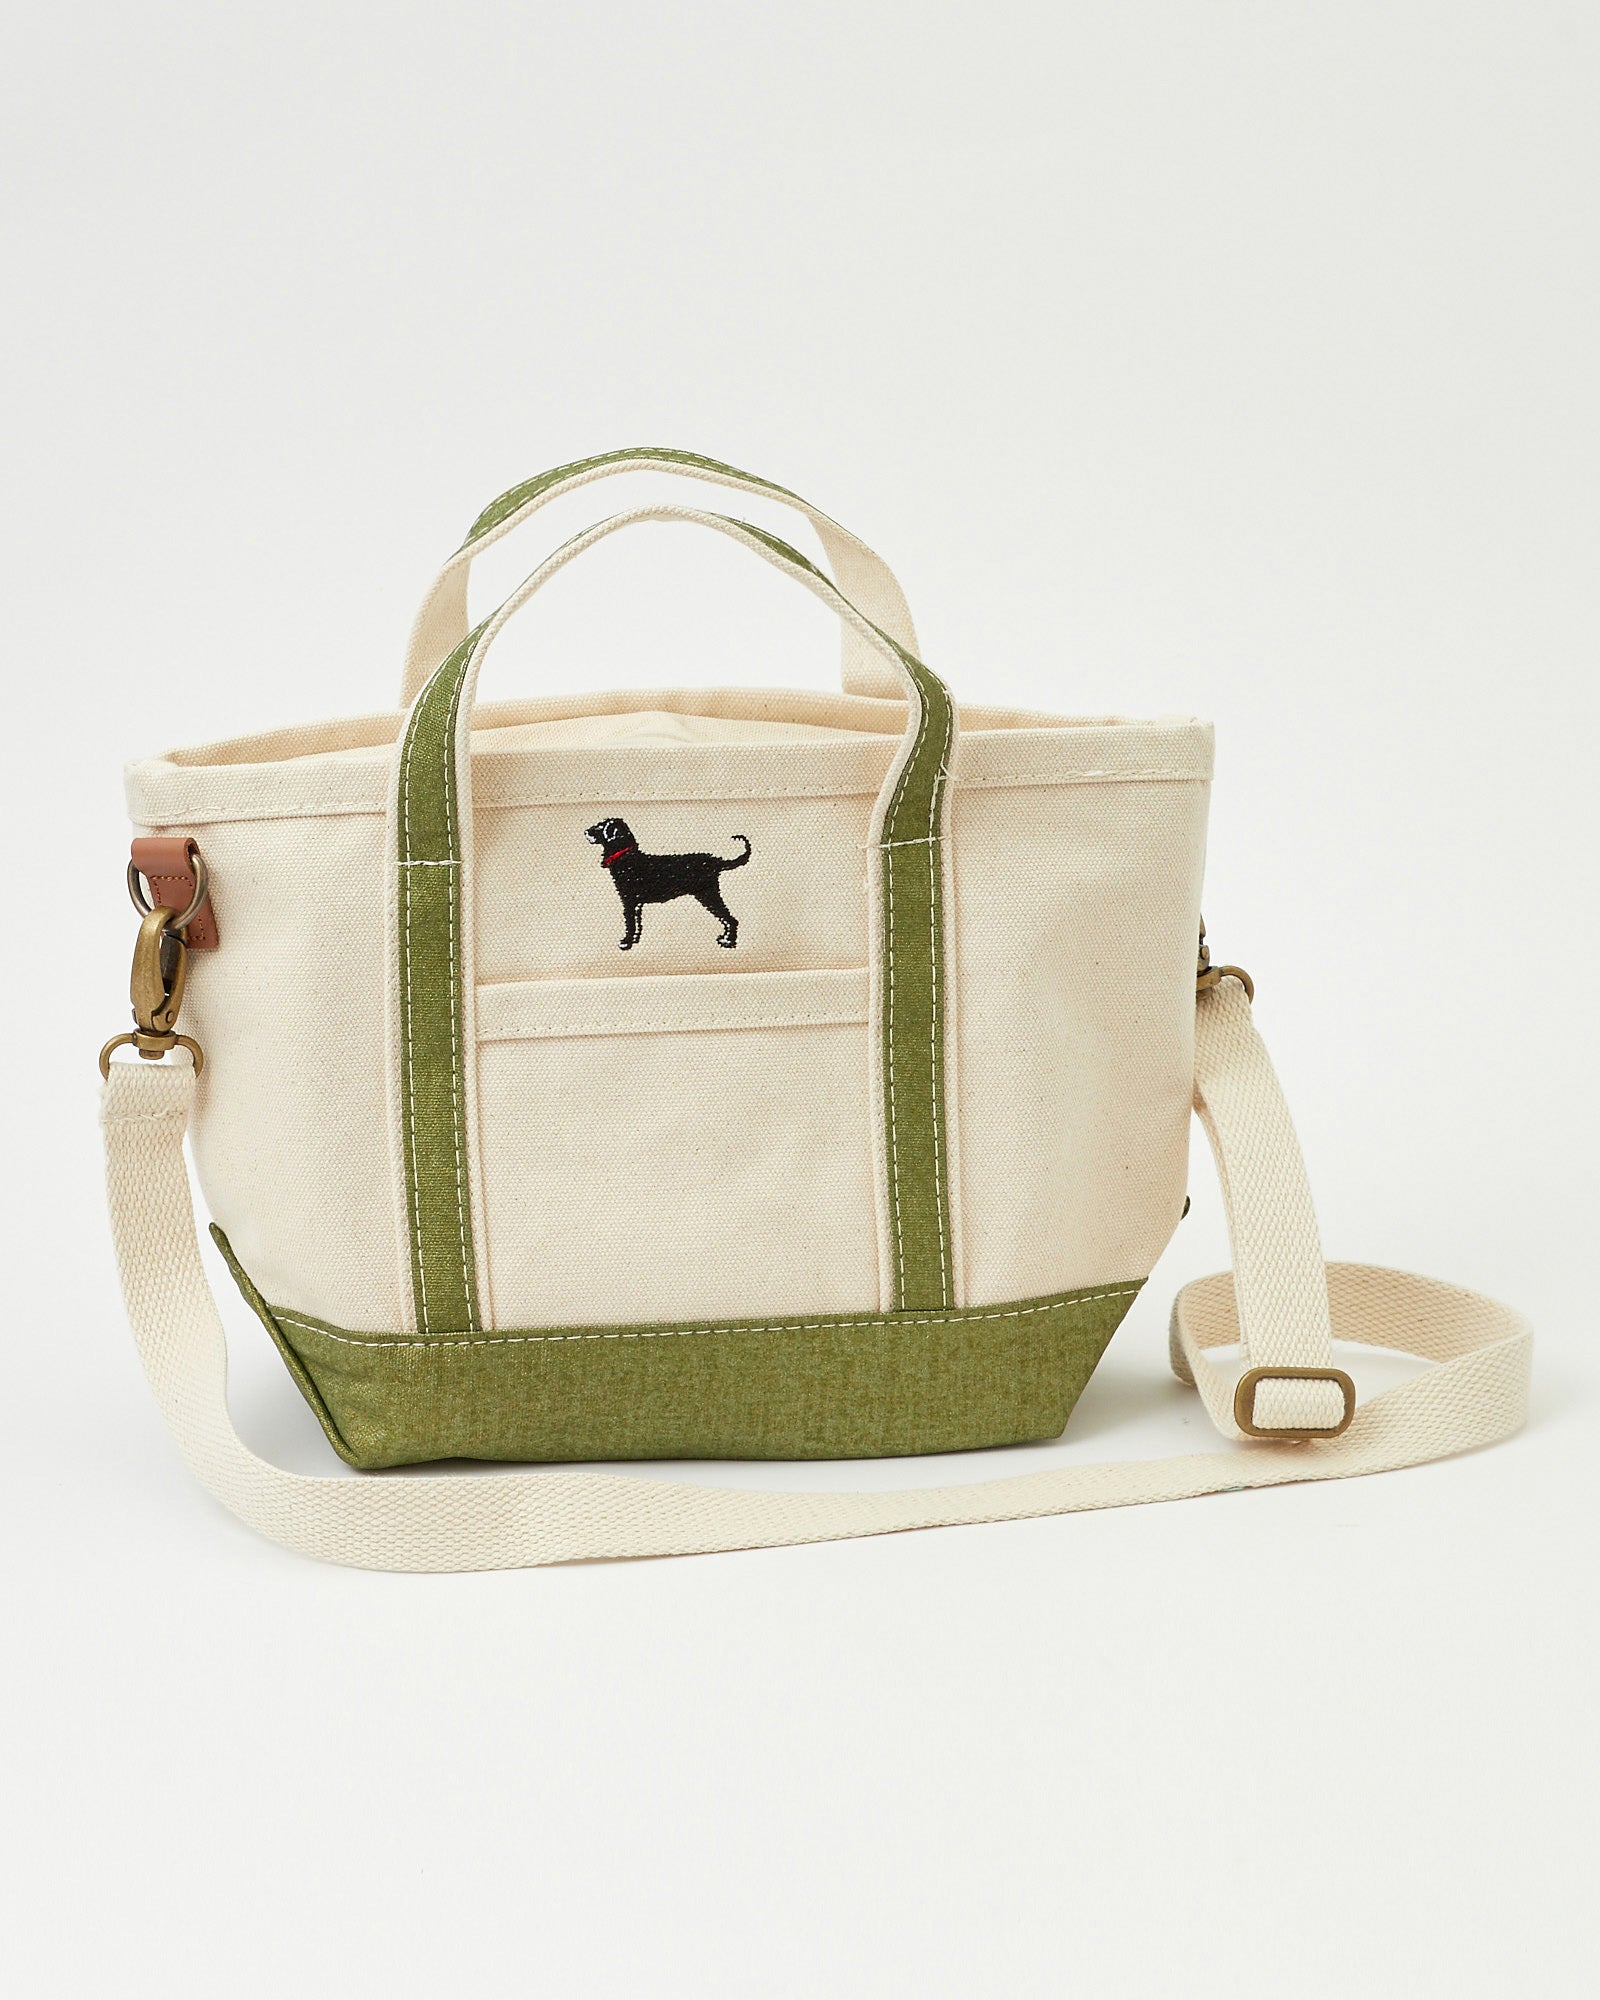 SOPH L.L.Bean BOAT AND TOTE OPEN-TOP - バッグ